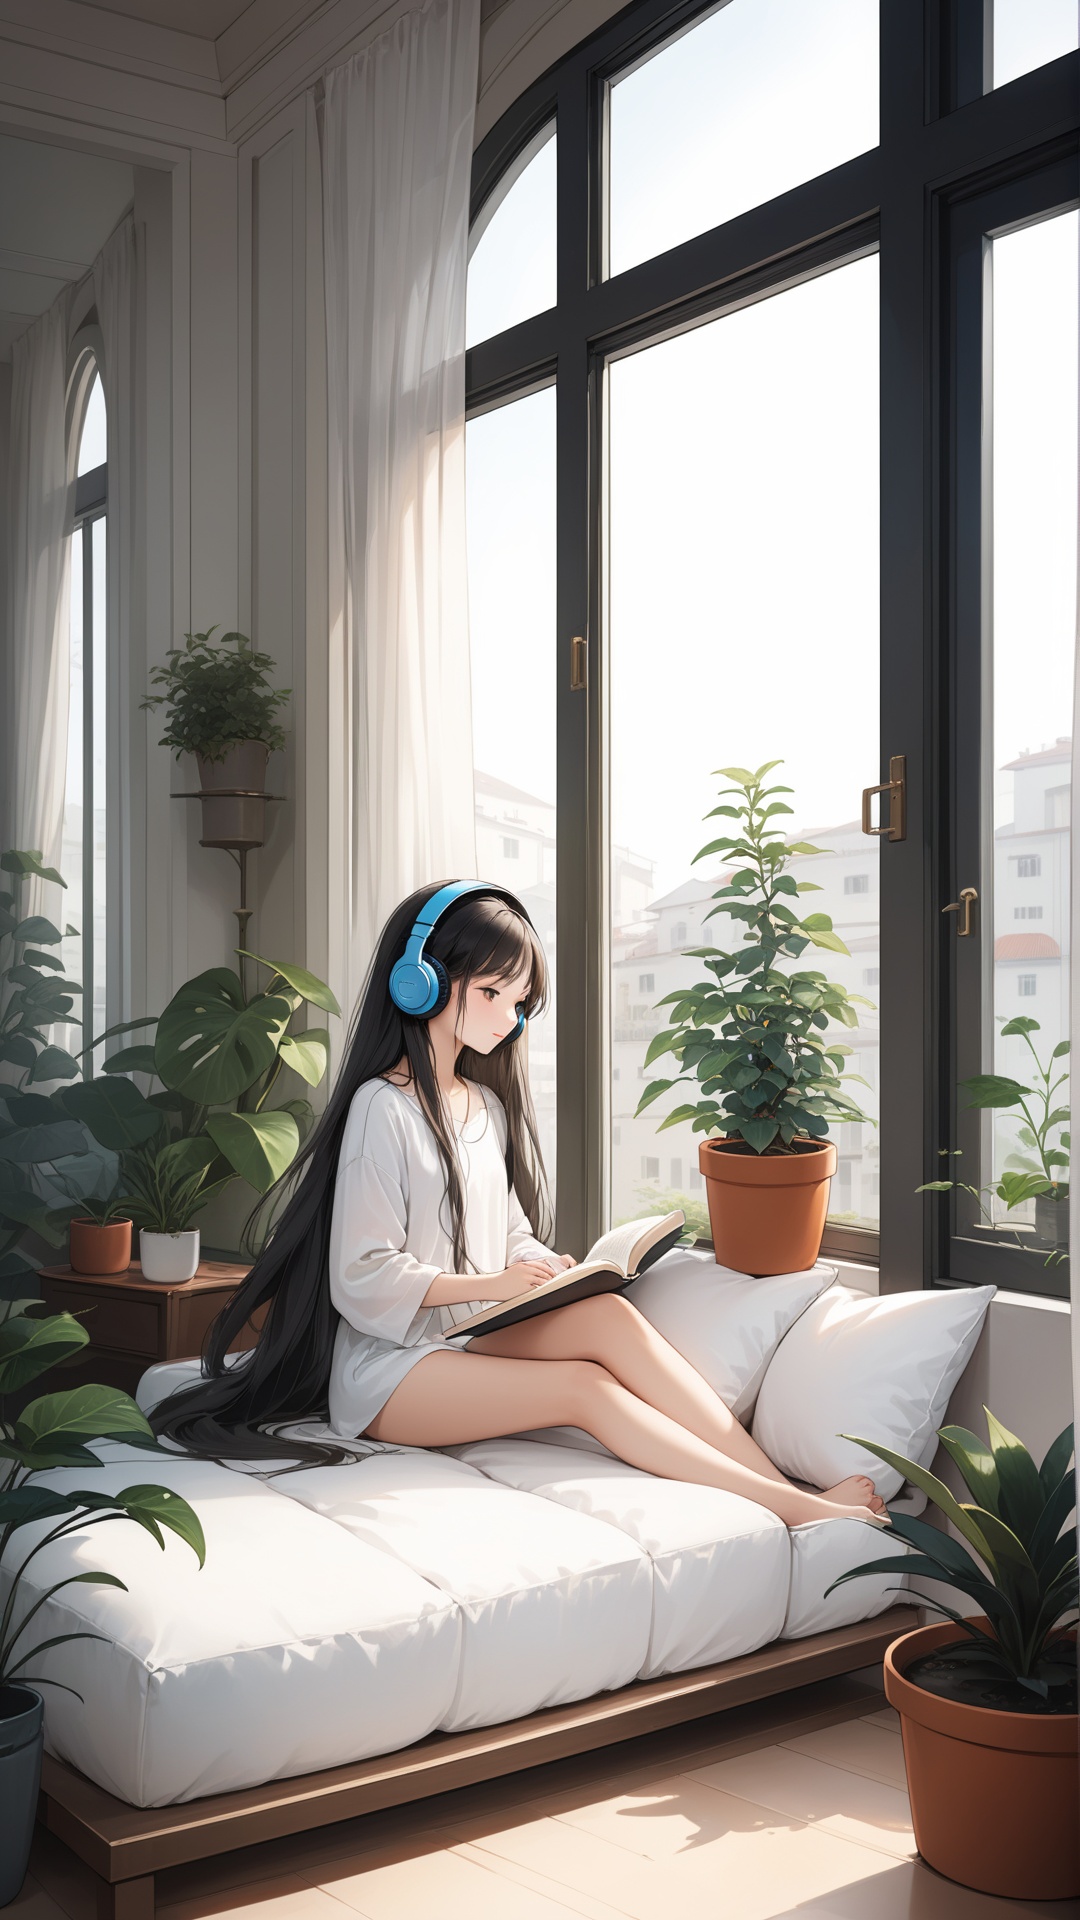  extremely delicate and beautiful, depth of field, amazing, masterpiece, growth, visual impact, ultra-detailed, 1girl, long_hair, Modernist style architecture, window, book, pillow, barefoot, solo, plant, very_long_hair, indoors, potted_plant, headphones, cup, gorgeous, fantasism, nature, refined rendering, original, contour deepening, high-key and low-variance brightness scale, soft light, light and dark interlaced